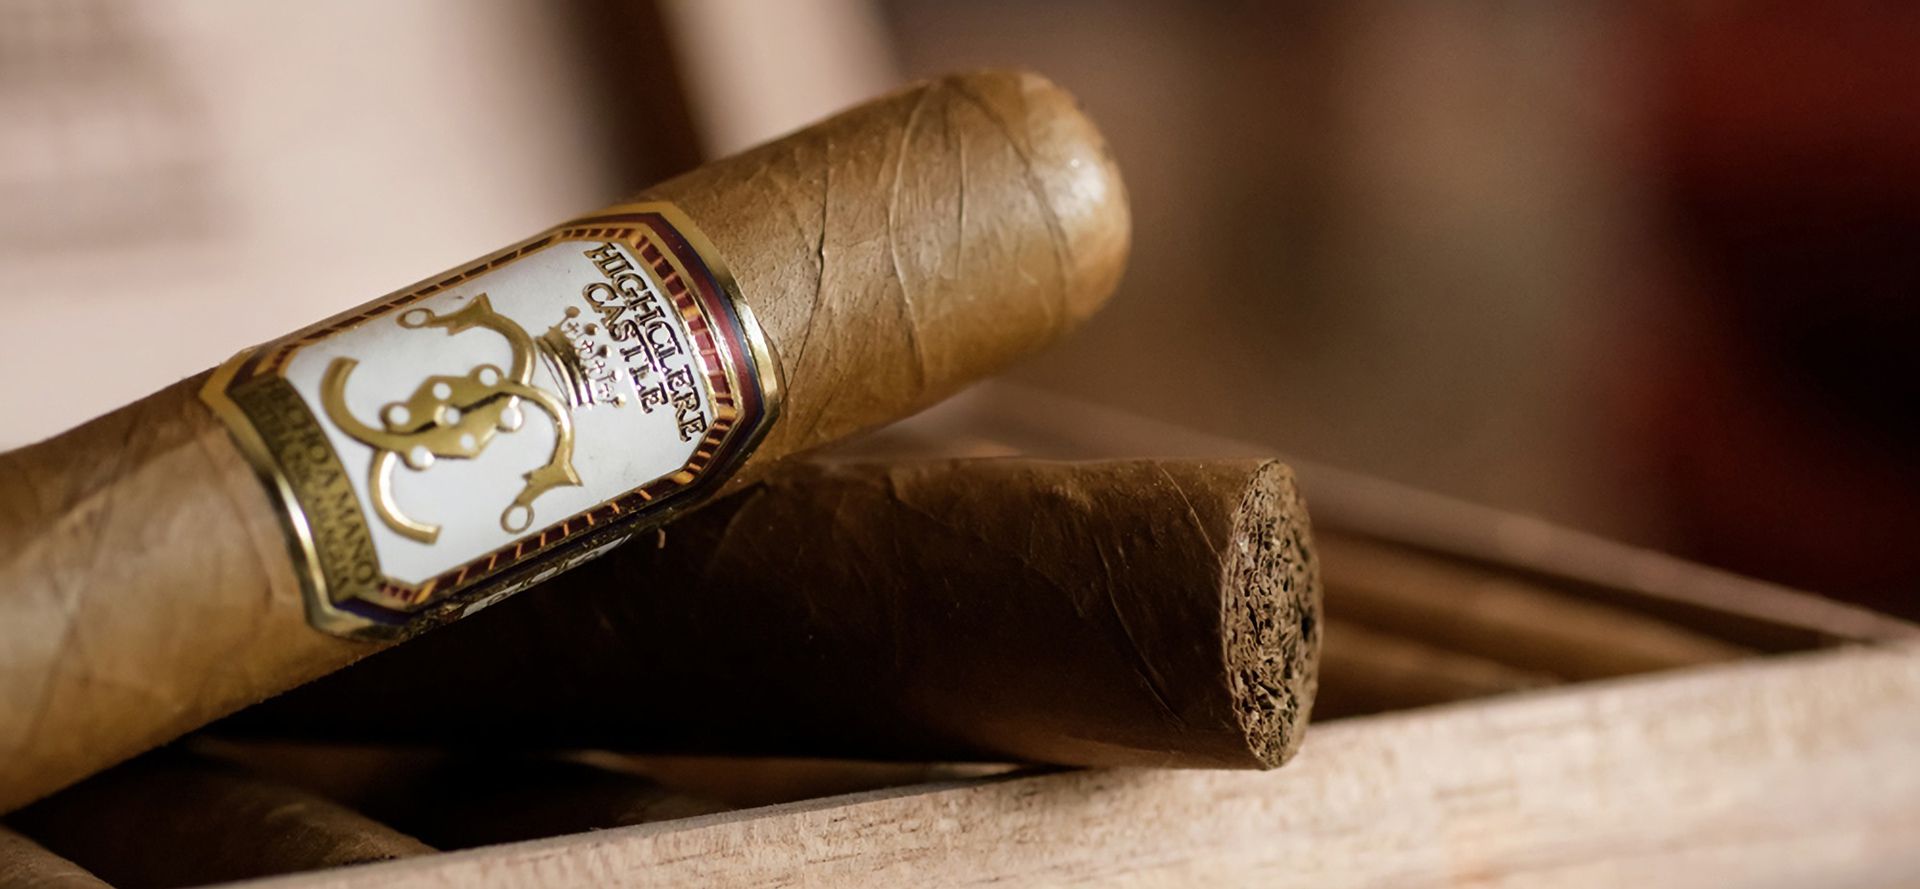 Why are Cuban Cigars Illegal?